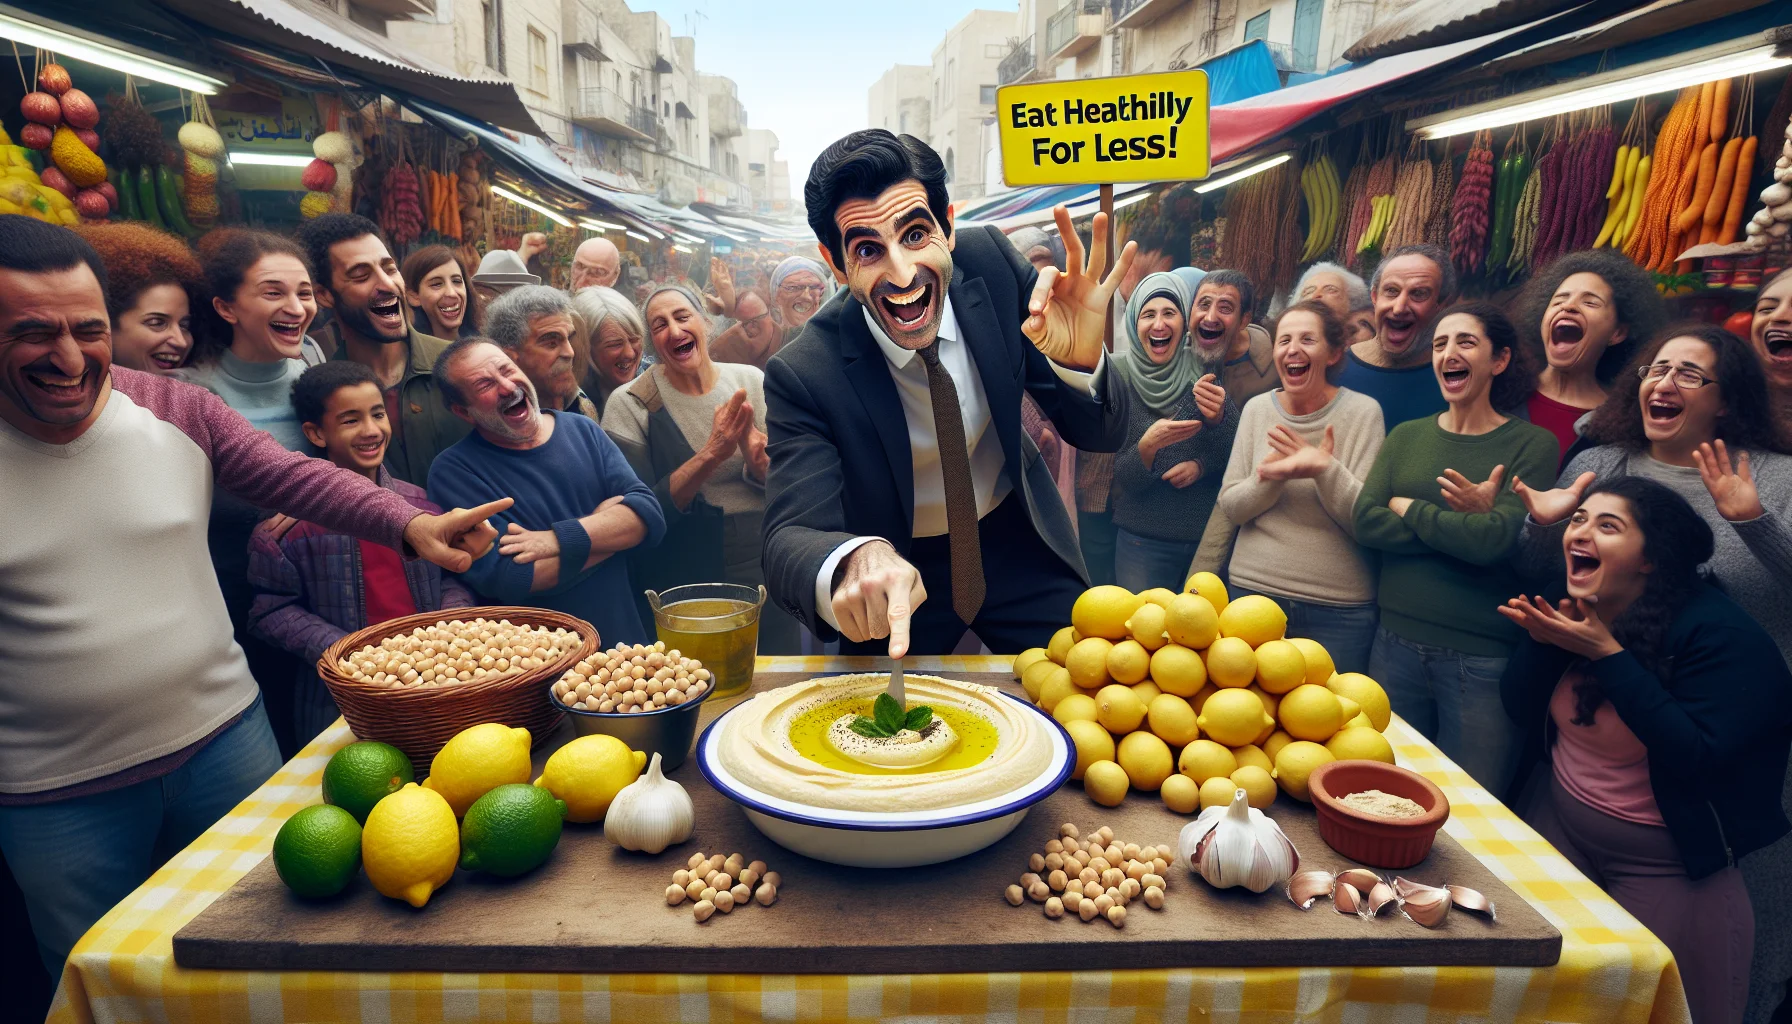 Create a humorous scenario set in a bustling market. A charismatic Middle-Eastern man is demonstrating how to make hummus, pointing enthusiastically at a plate of the creamy dip made from chickpeas, tahini, fresh lemon juice, and garlic. The plate is surrounded by fresh, affordable ingredients - a pile of chickpeas, lemons, and a bulb of garlic, indicating that healthy eating doesn't have to be expensive. The crowd of onlookers, diverse in descent and gender, are laughing and looking intrigued. To emphasize the affordability, a sign reading 'Eat healthily for less!' is prominently displayed.